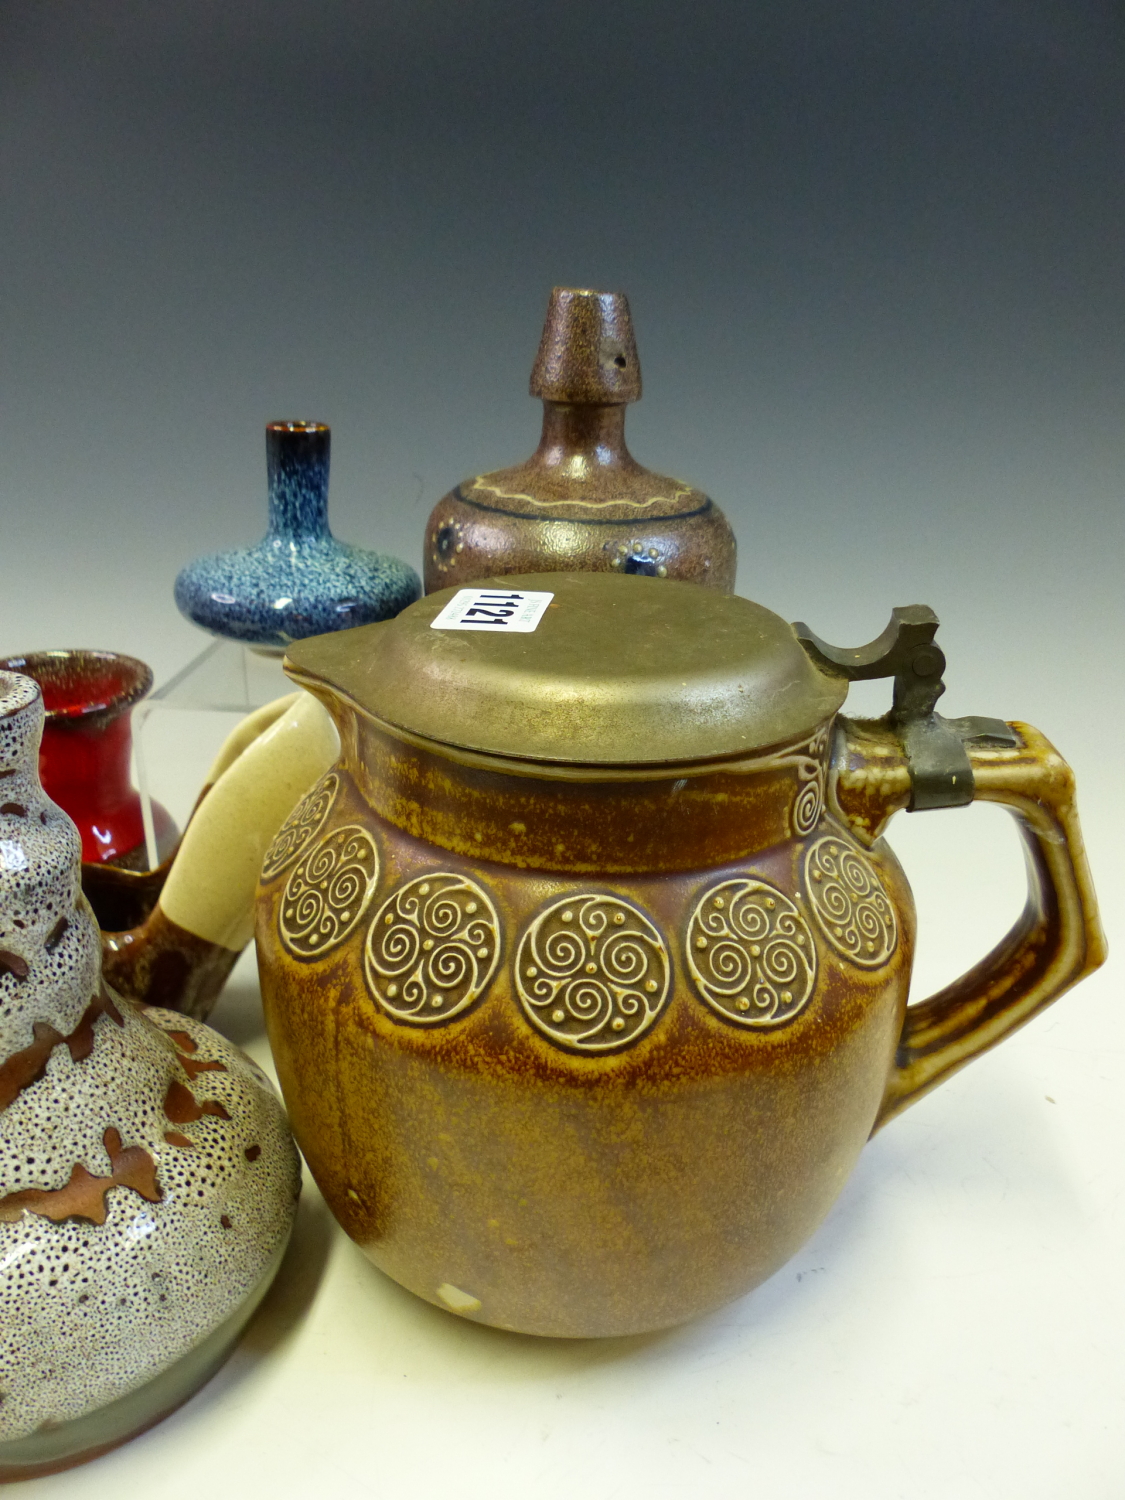 FOUR STUDIO POTTERY VASES, A SHOE AND A MERKELBACH BROWN STONE WARE JUG MOUNTED WITH A METAL LID - Image 2 of 3